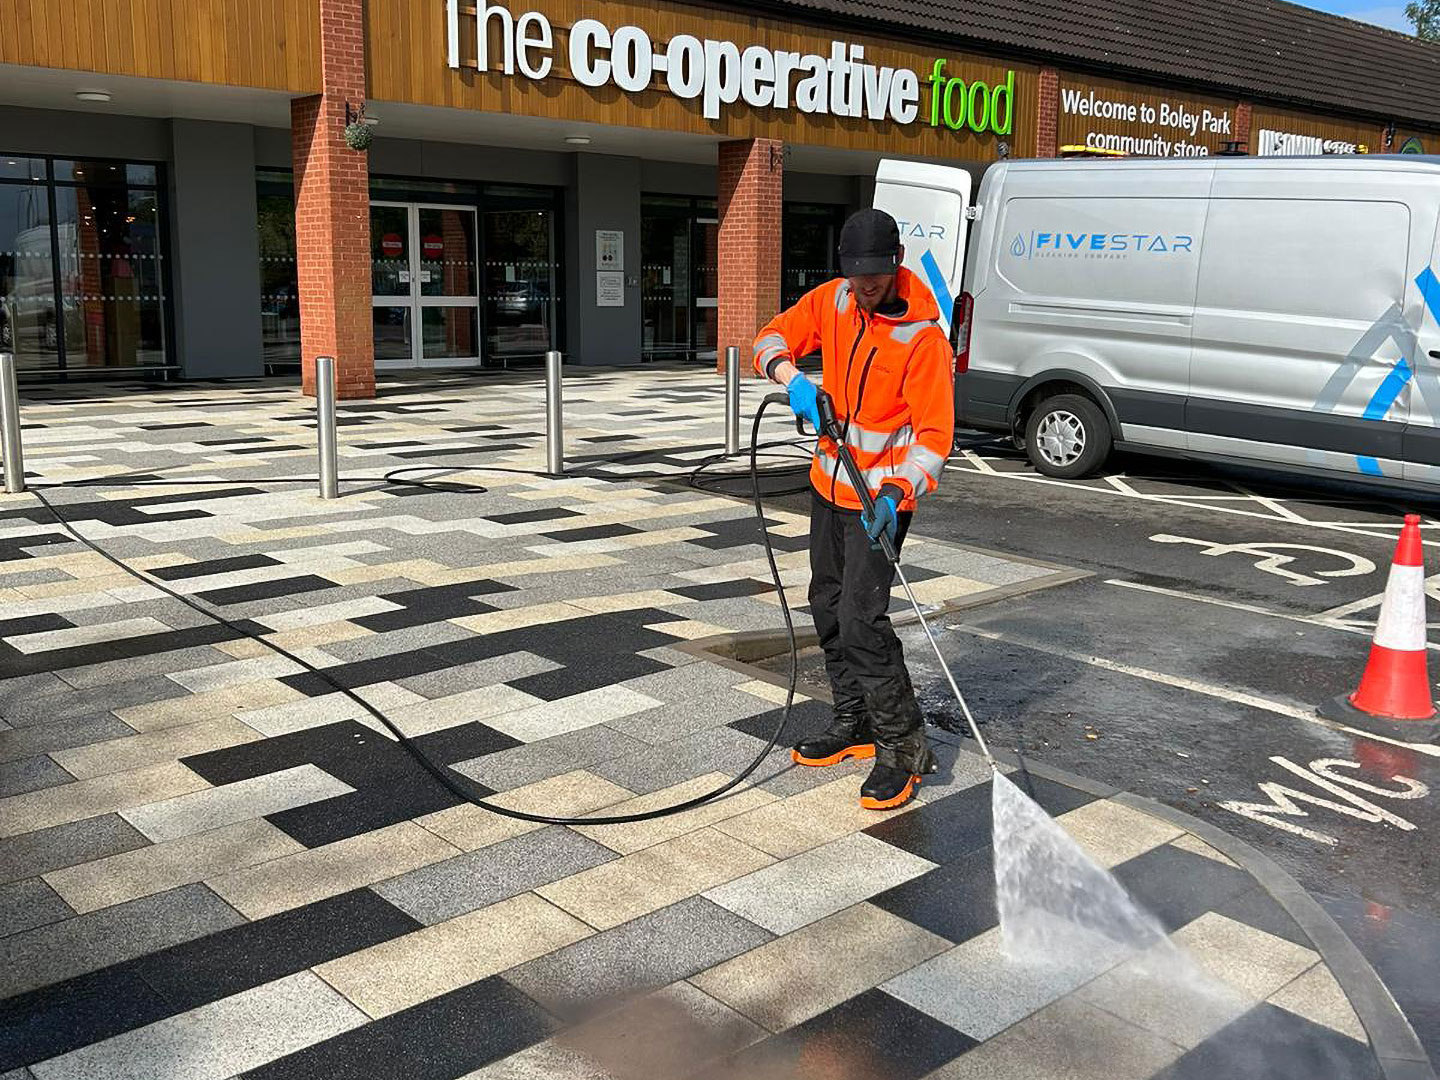 Pressure washing the Co-operative food paving